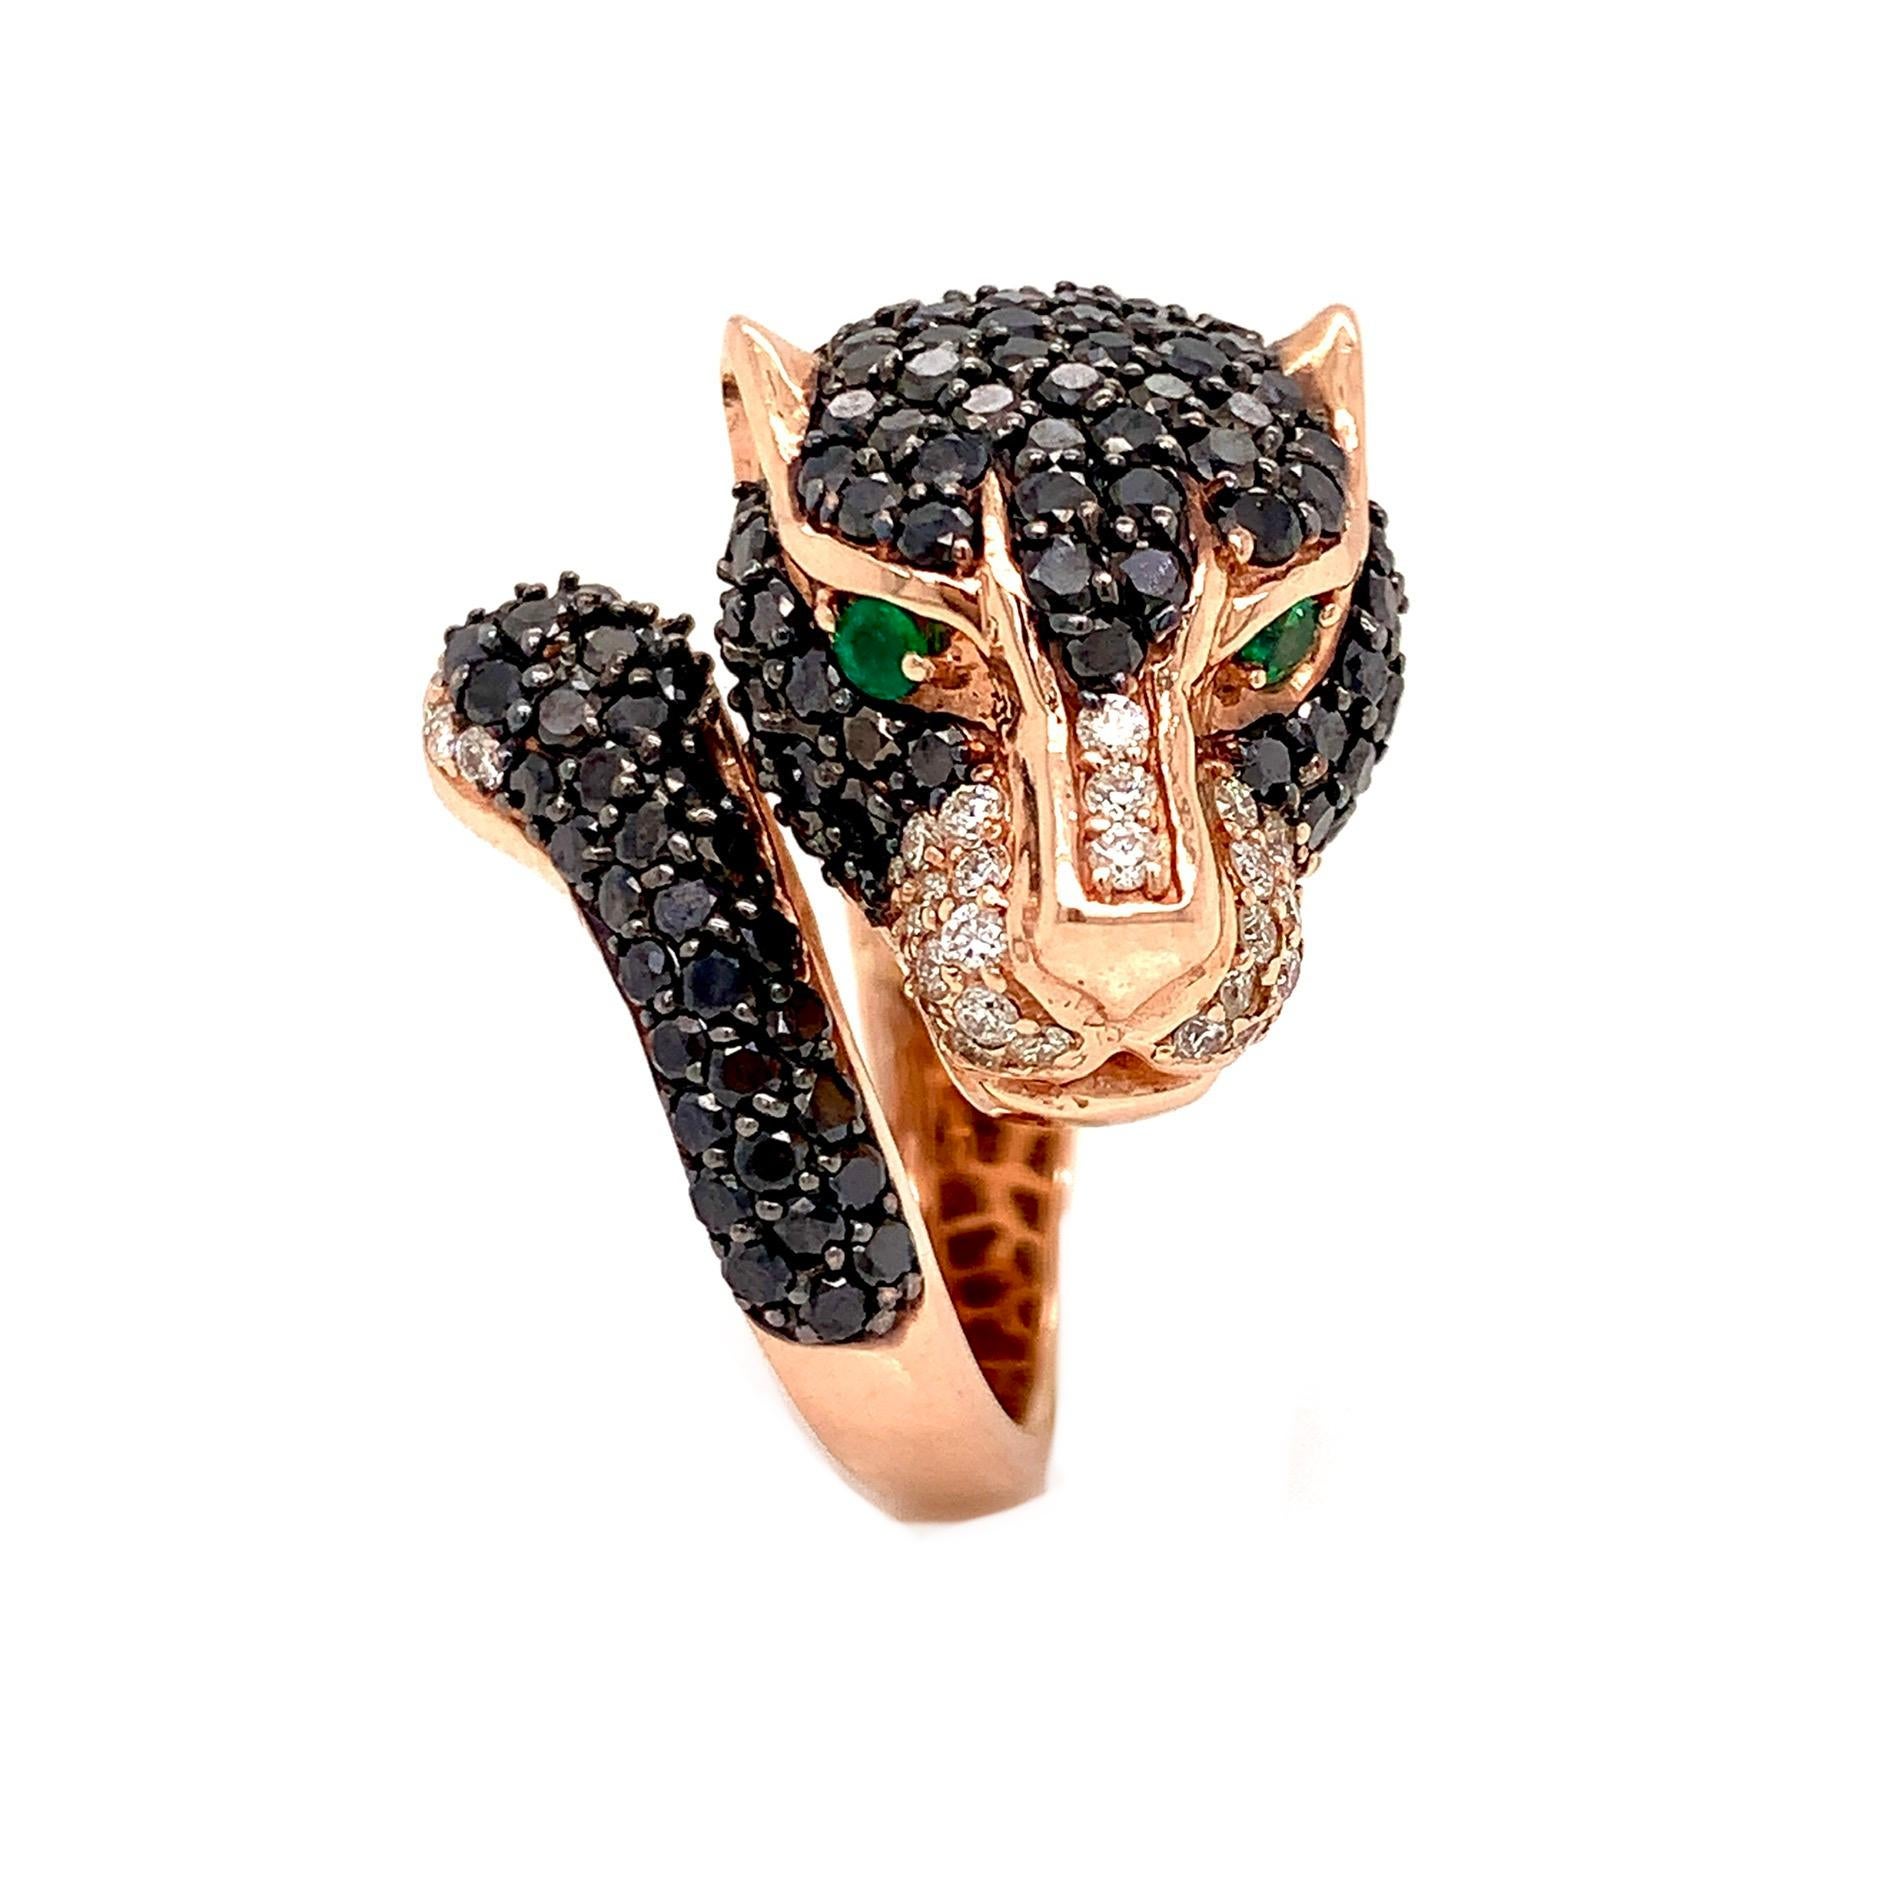 Take a walk on the wild side with this fabulous designer Effy ring!  With 3.70 cttw in black and white diamonds on the panthers head and .08 cttw emerald for the panthers eye, this bold 14 K rose gold ring will be your go to statement ring

This is